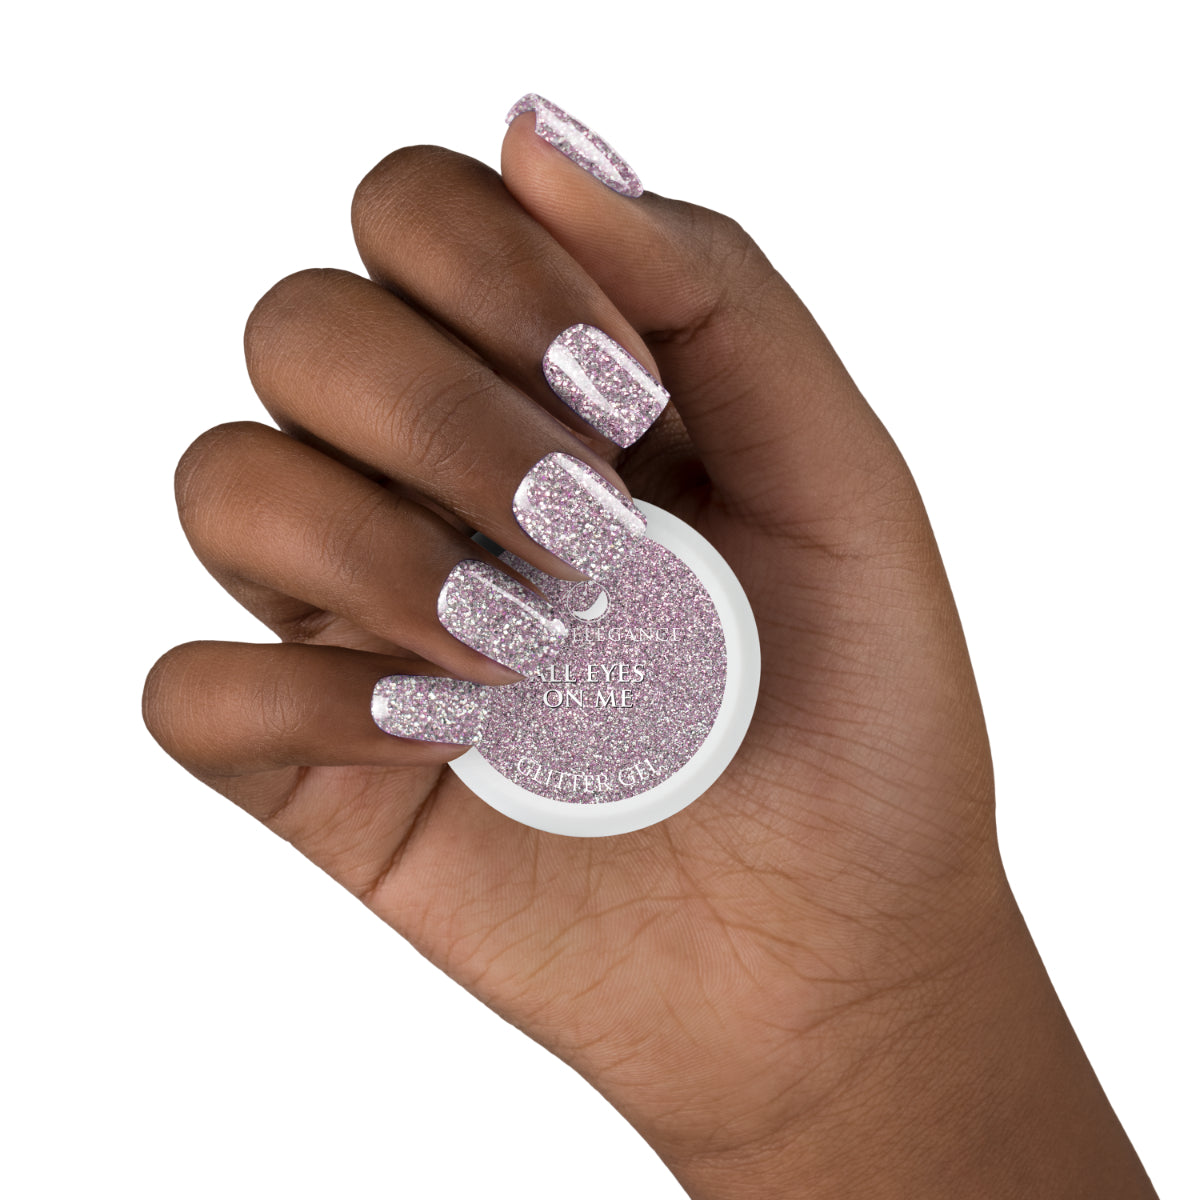 Light Elegance Glitter Gel - All Eyes on Me :: New Packaging - Creata Beauty - Professional Beauty Products